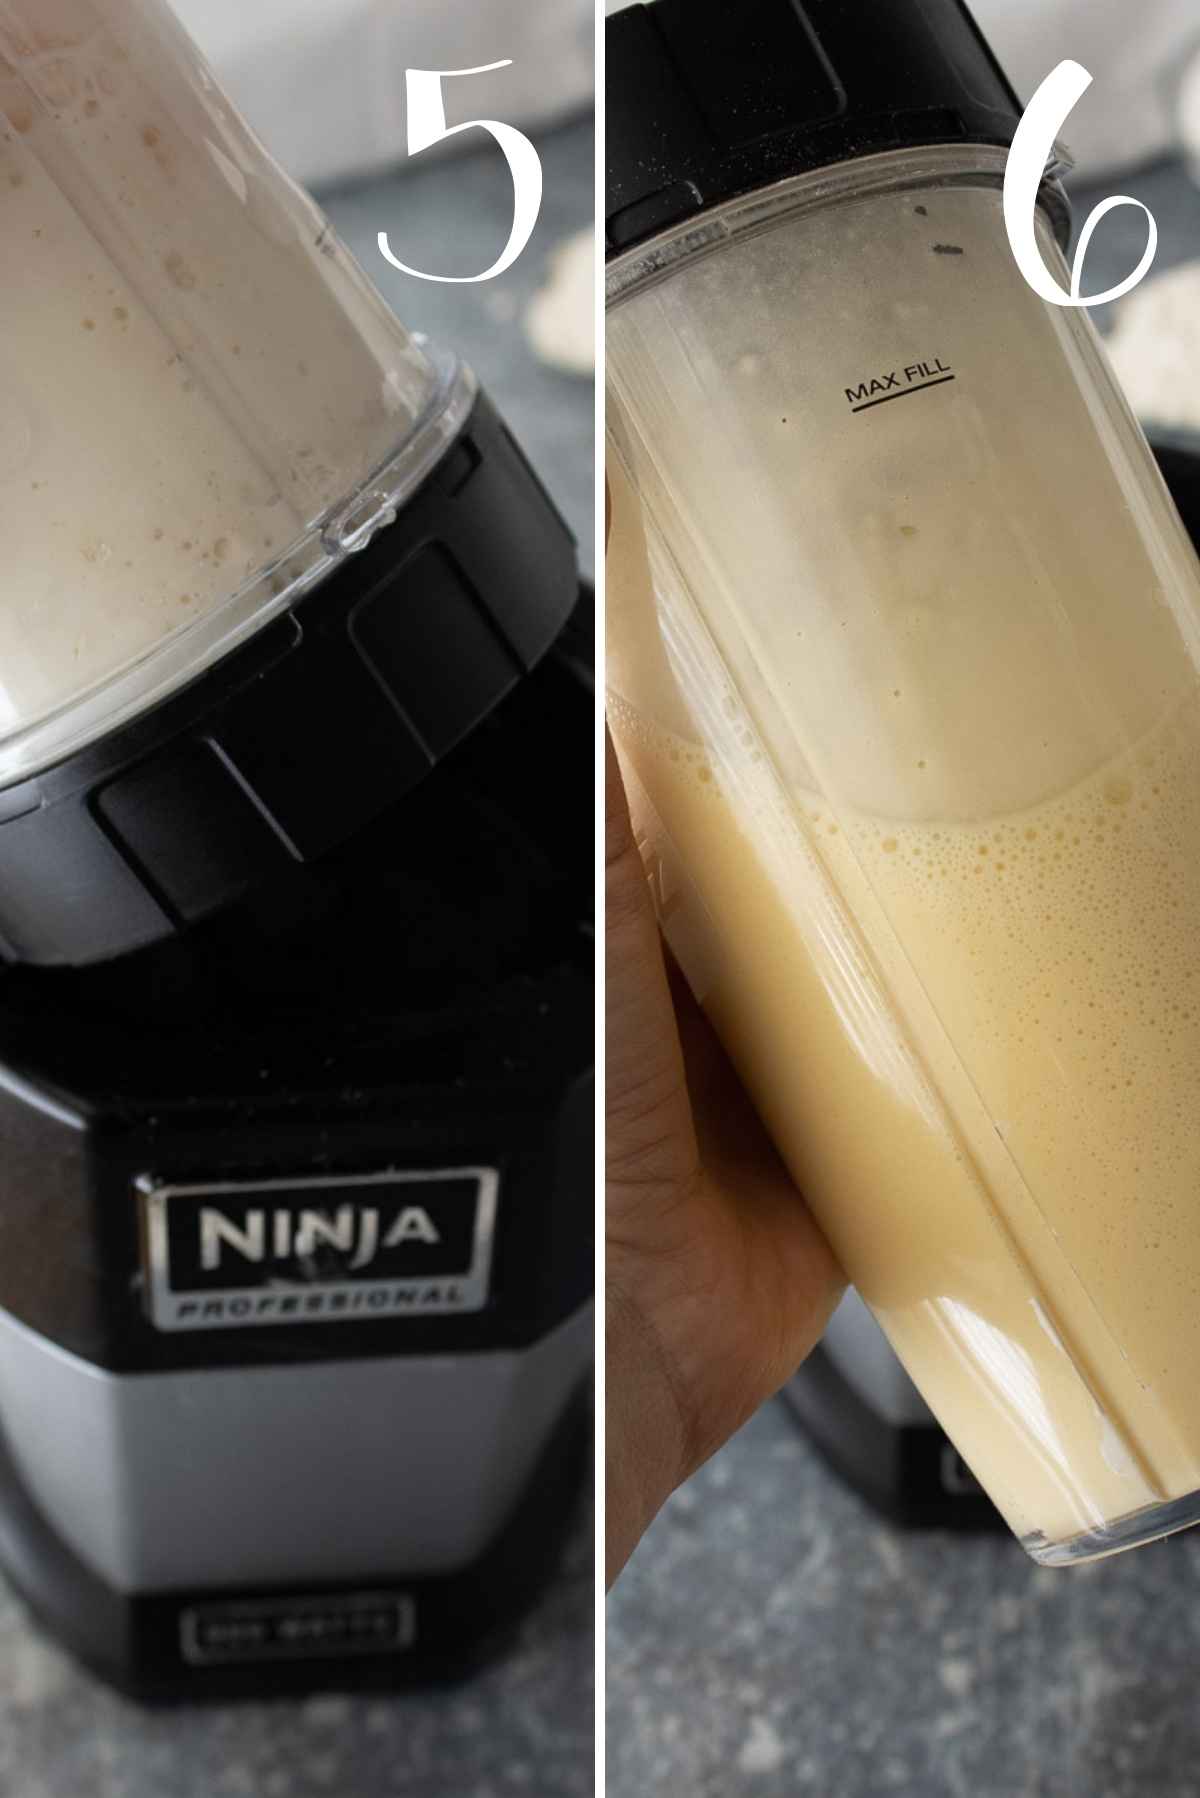 Before and after blending the ingredients.